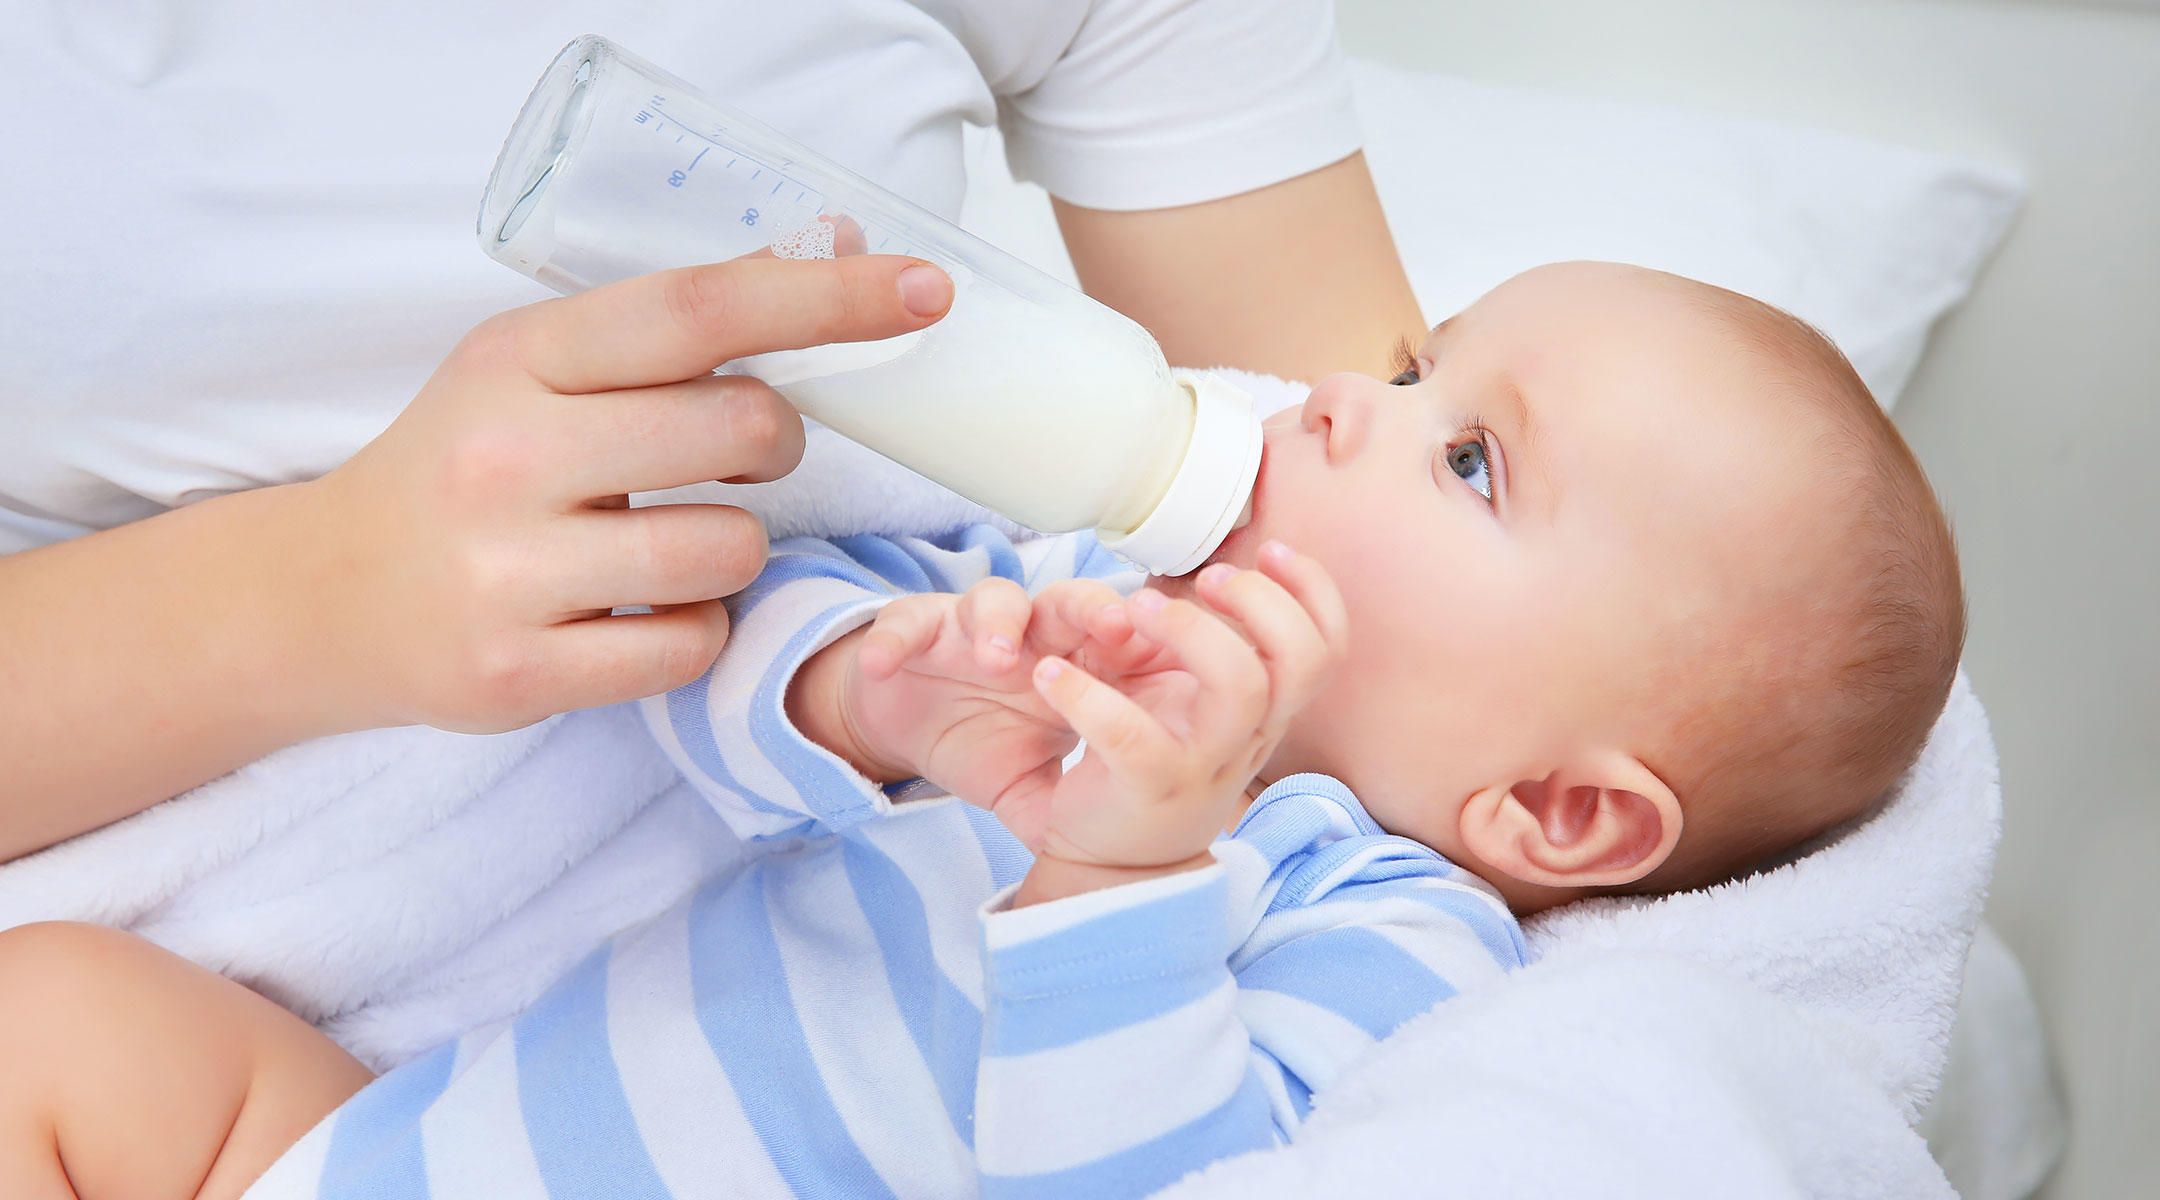 Tips for preventing milia in babies